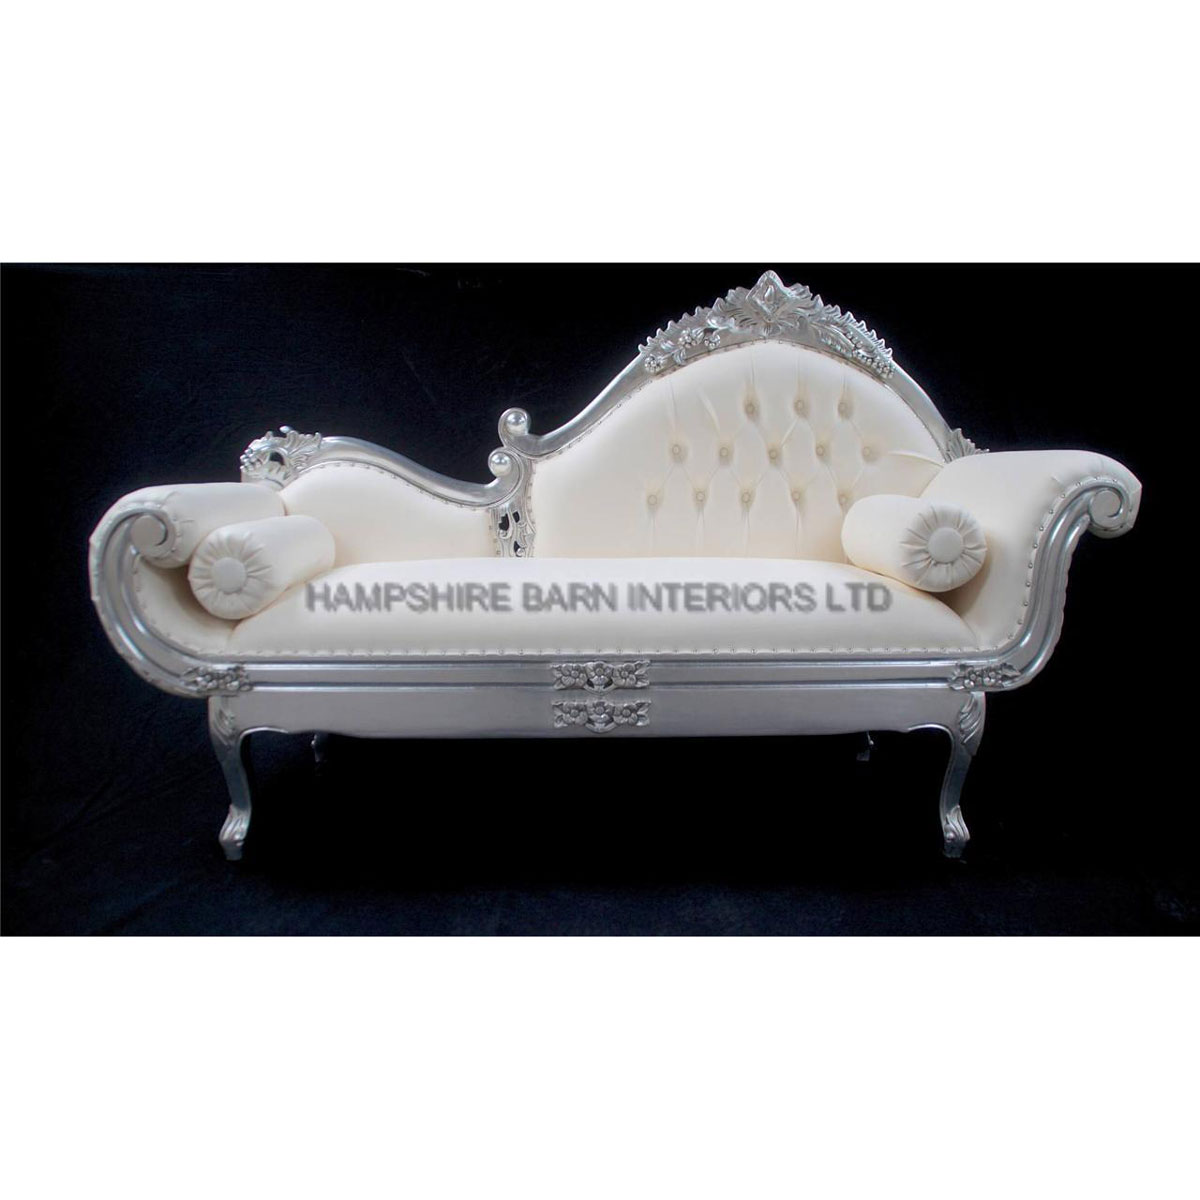 Amberley Chaise Longue Medium Size Ornate Silver Leaf With White Faux Leather 1 - Hampshire Barn Interiors - Amberley Chaise Longue Medium Size Ornate Silver Leaf With White Faux Leather -